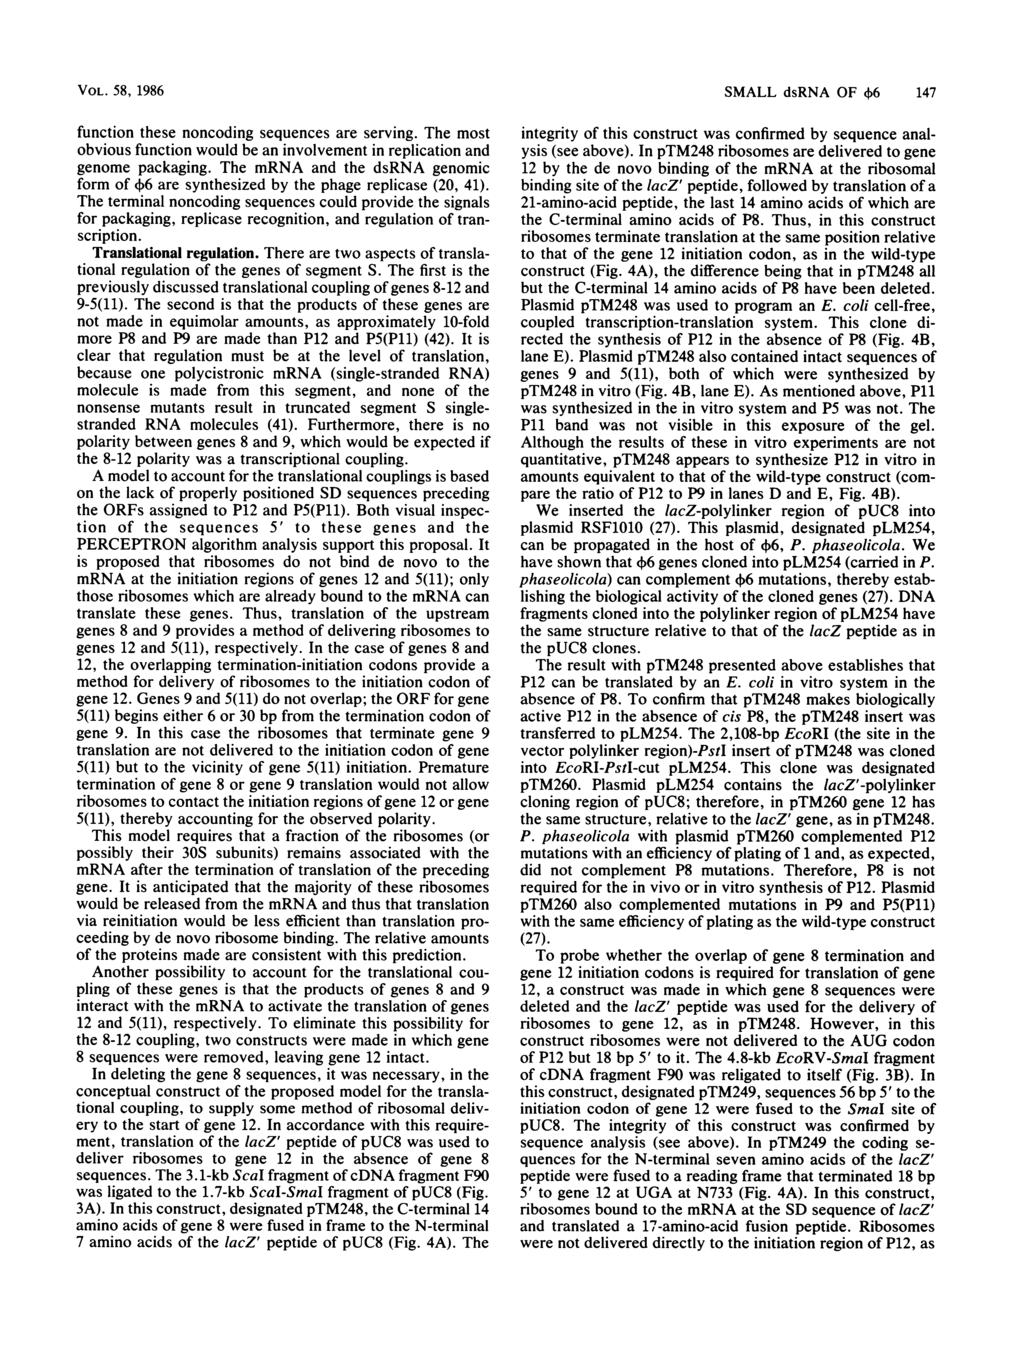 VOL. 58, 1986 function these noncoding sequences are serving. The most obvious function would be an involvement in replication and genome packaging.